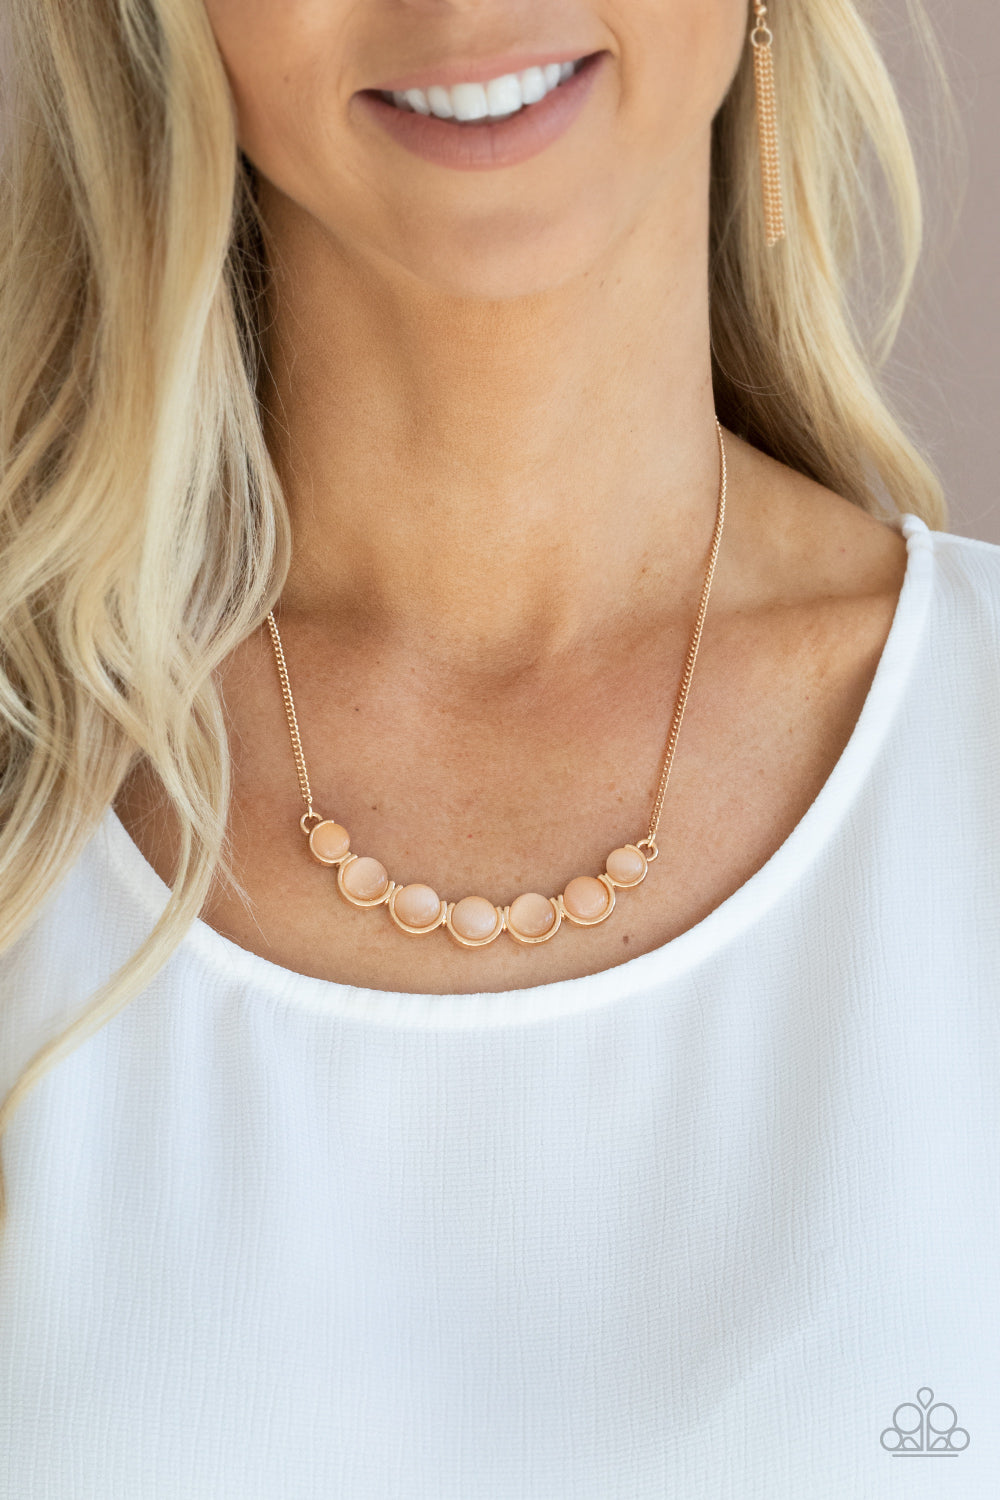 Serenely Scalloped Gold Necklace